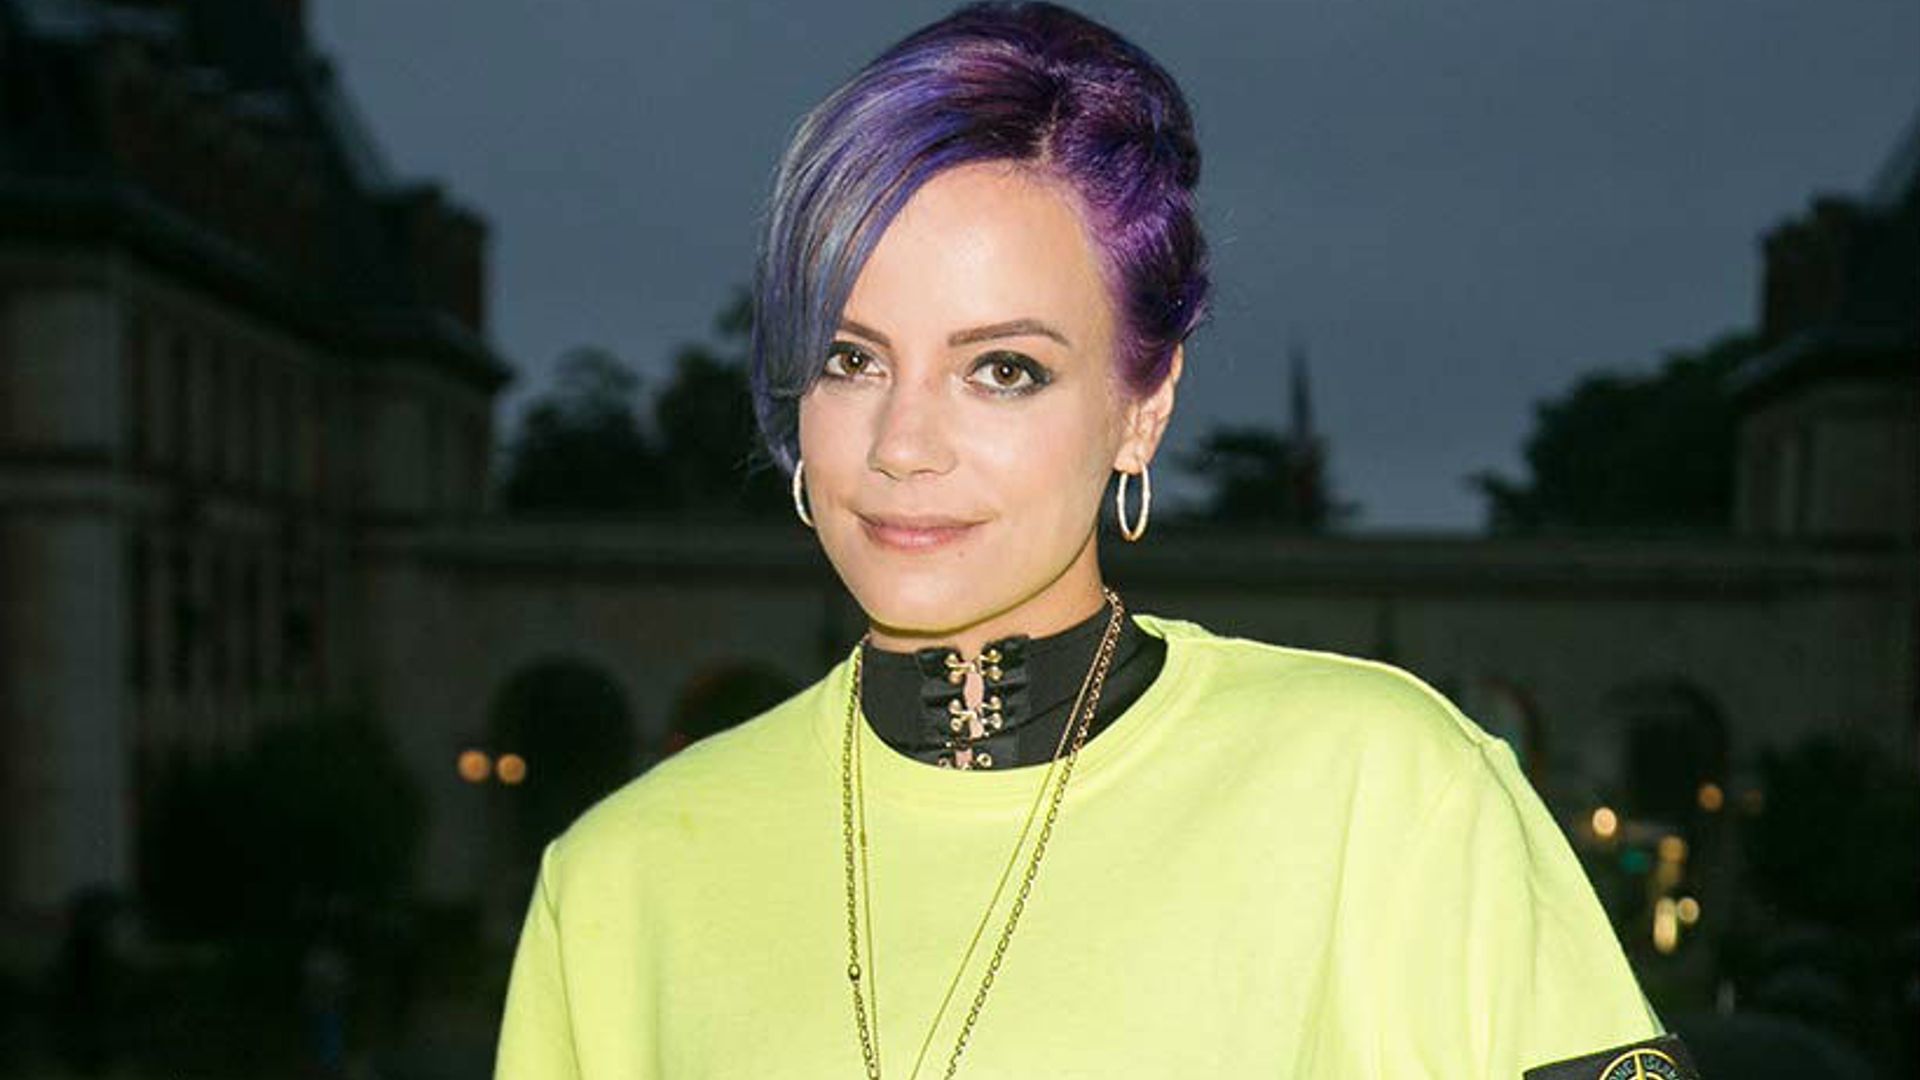 West London fire: Lily Allen offers bed and tea to victims